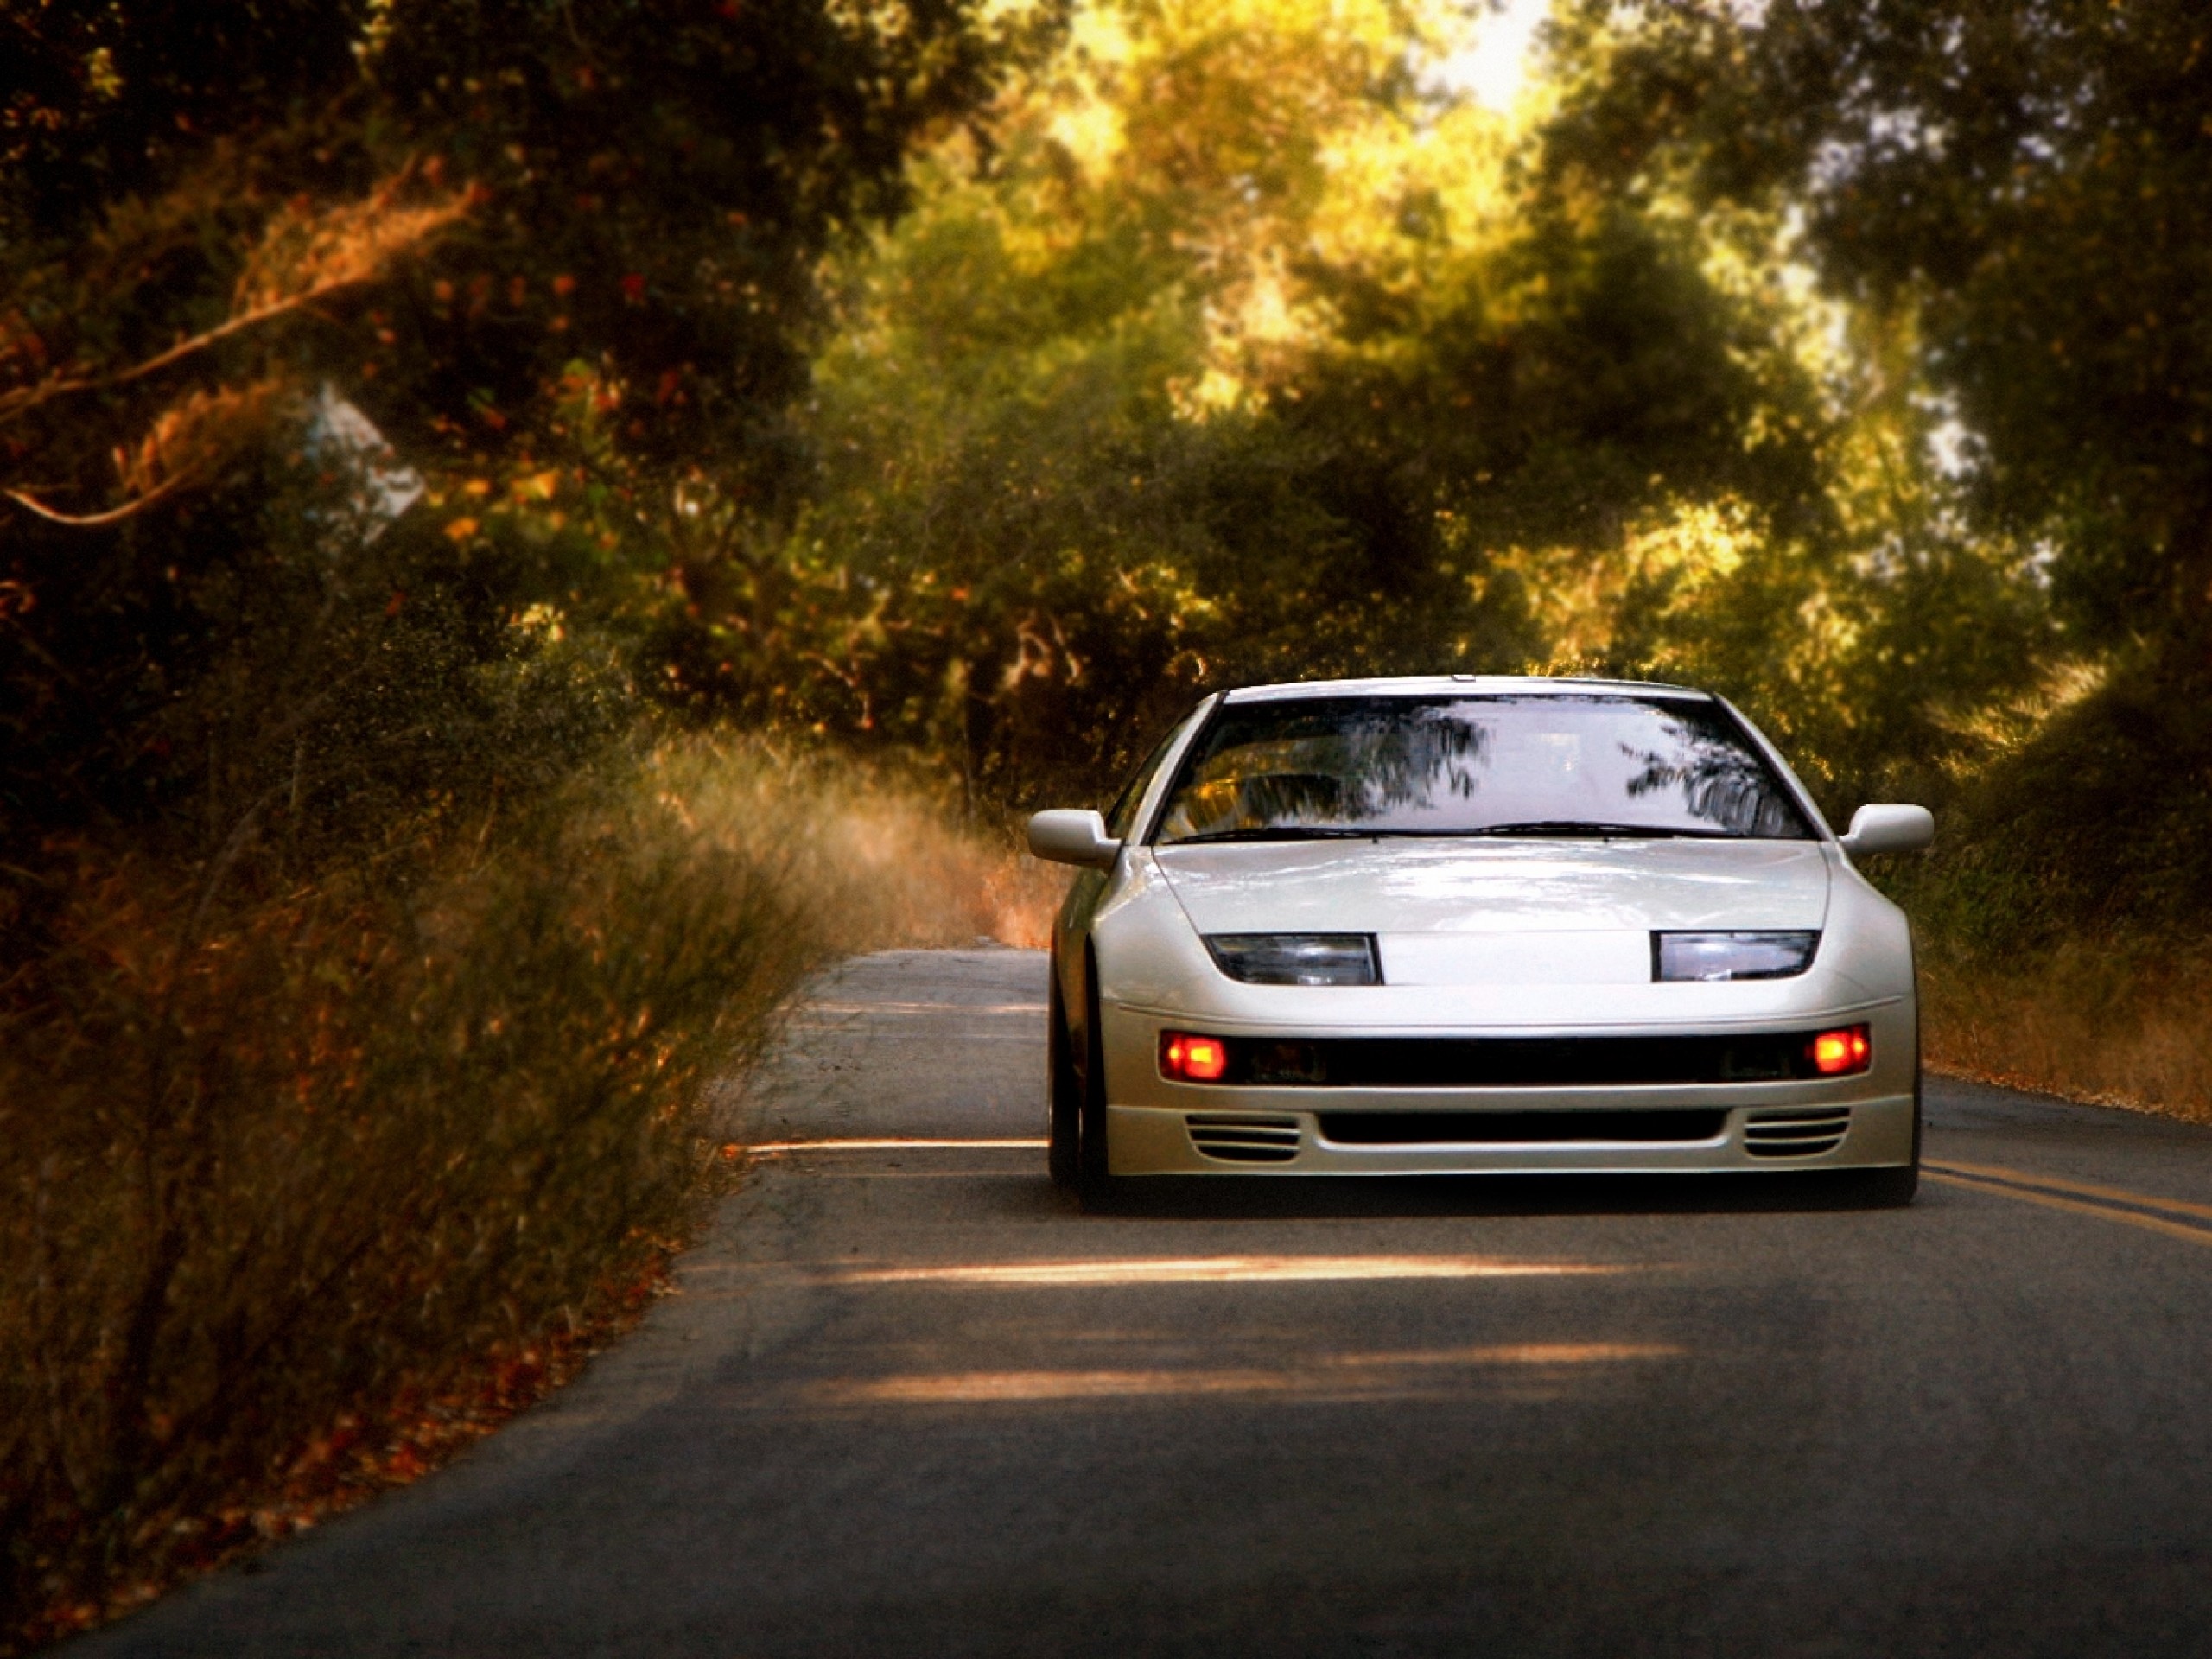 Nissan 300Zx Wallpapers